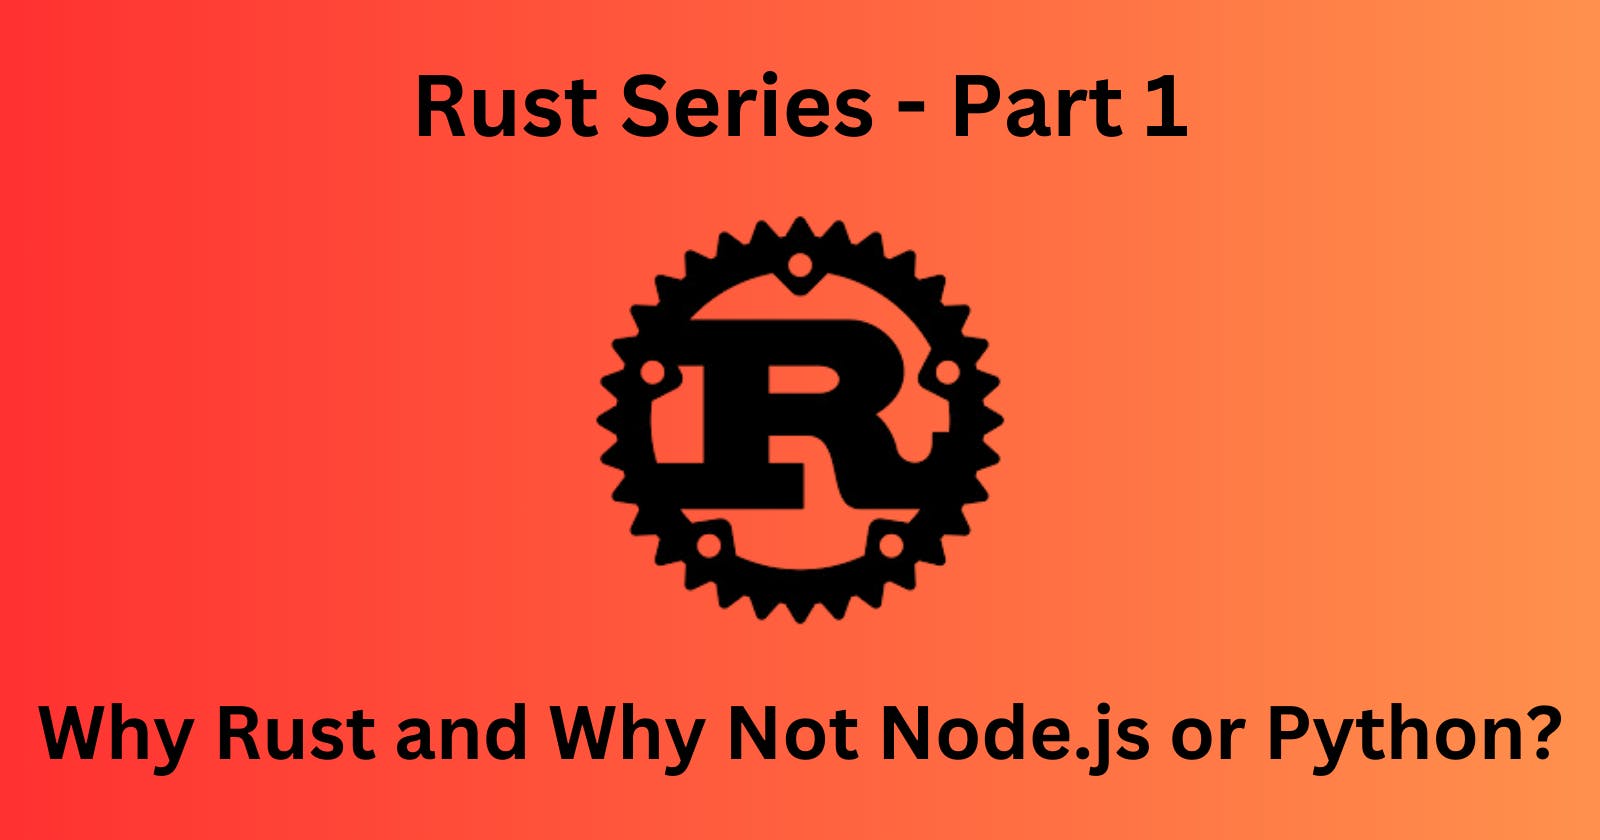 Why Rust and Why Not Node.js or Python? - Rust Series Part 1